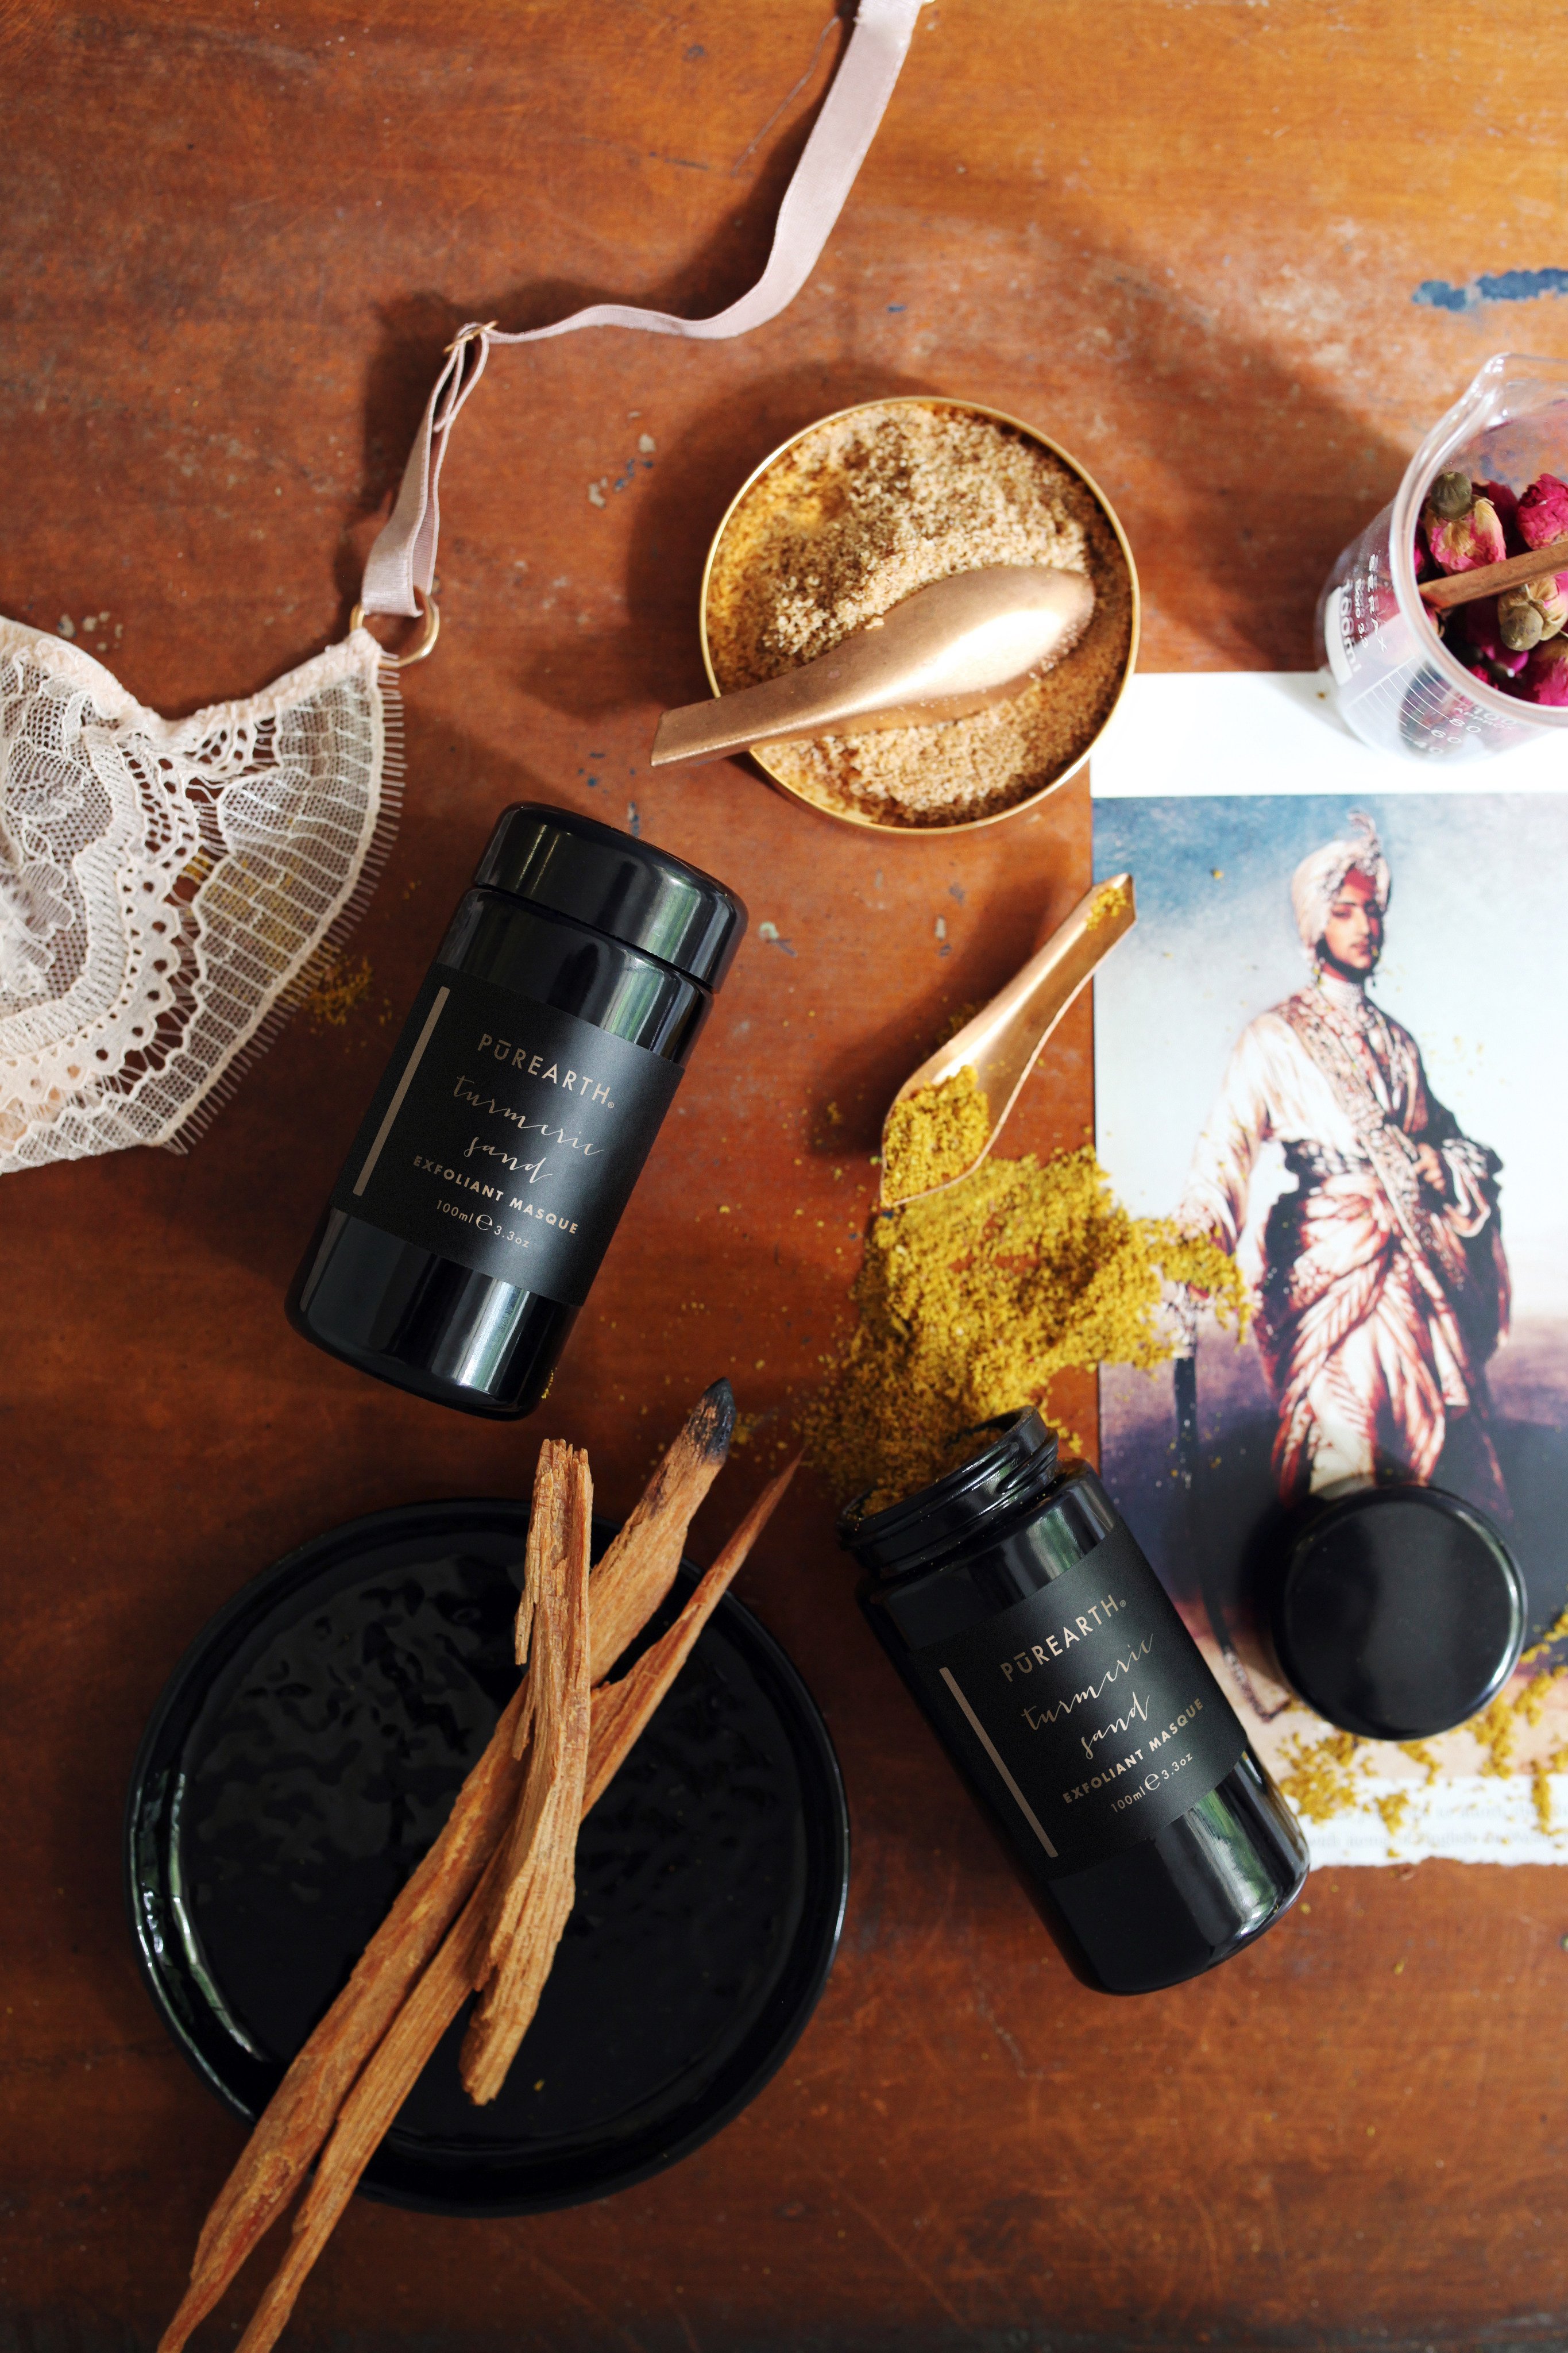 Ayurvedic skincare is the latest trend to hit the high street with traditional ingredients like saffron, turmeric, neem and ashwagandha married to modern formulations. Photo: Handout